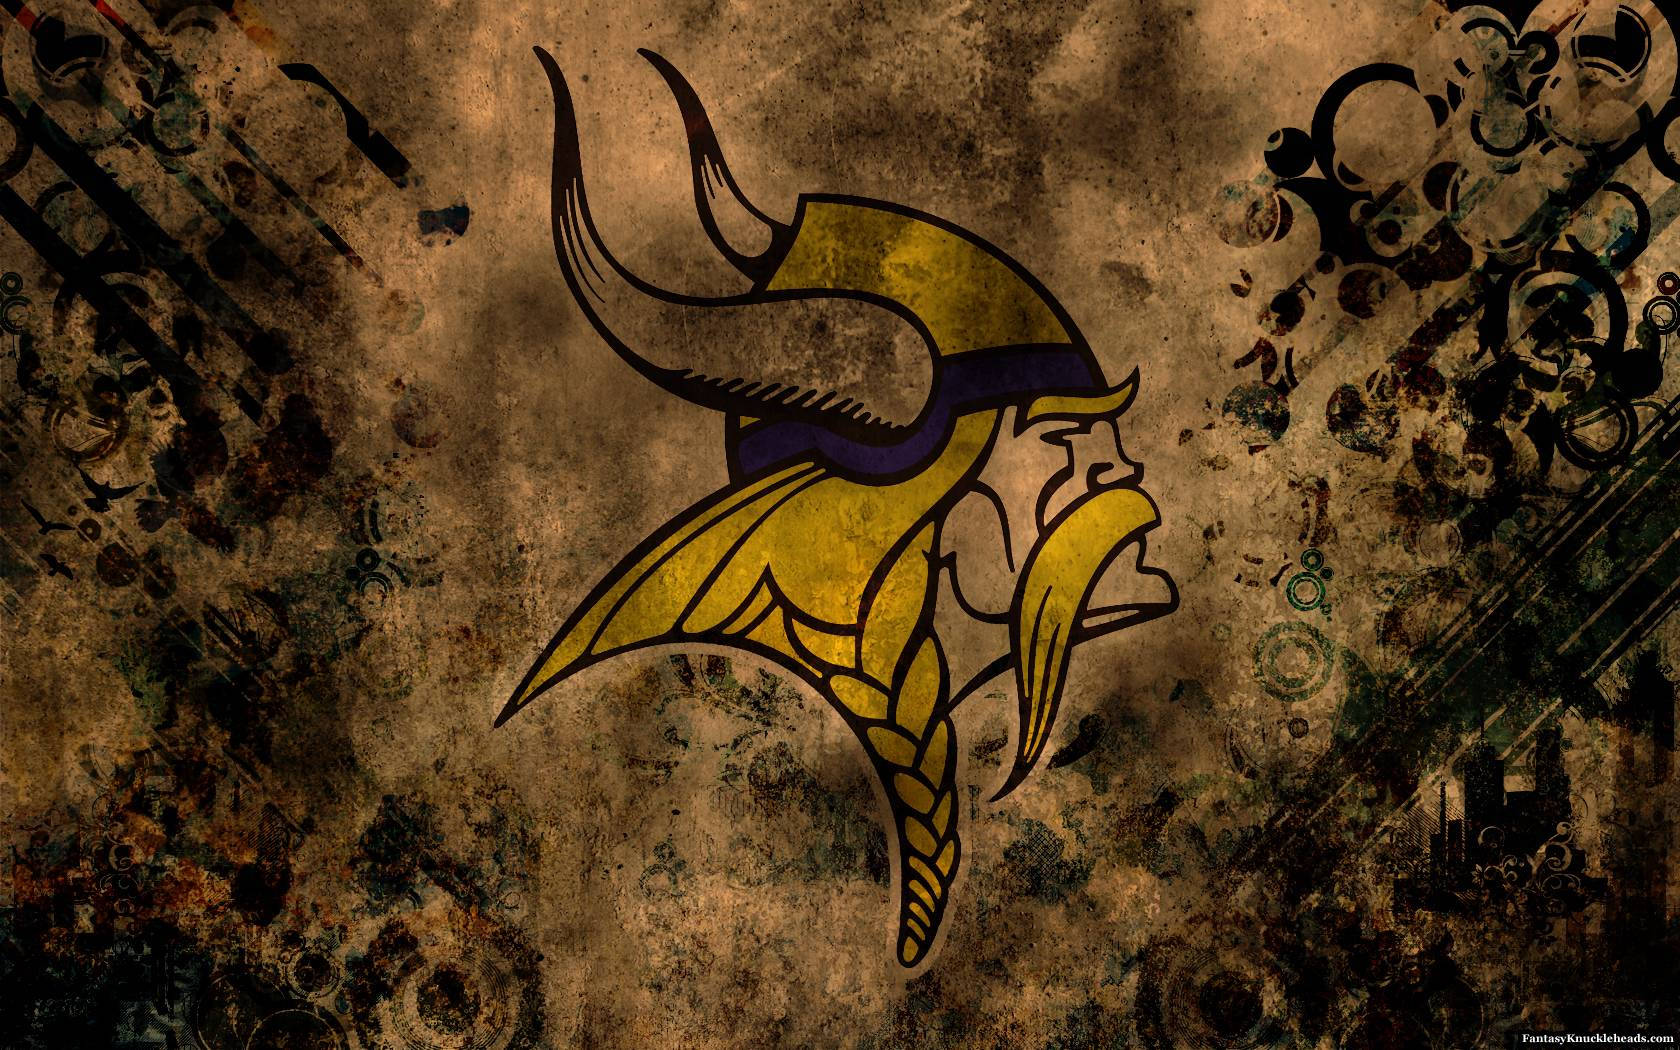 Get Ready For The Big Game with Minnesota Vikings Wallpaper